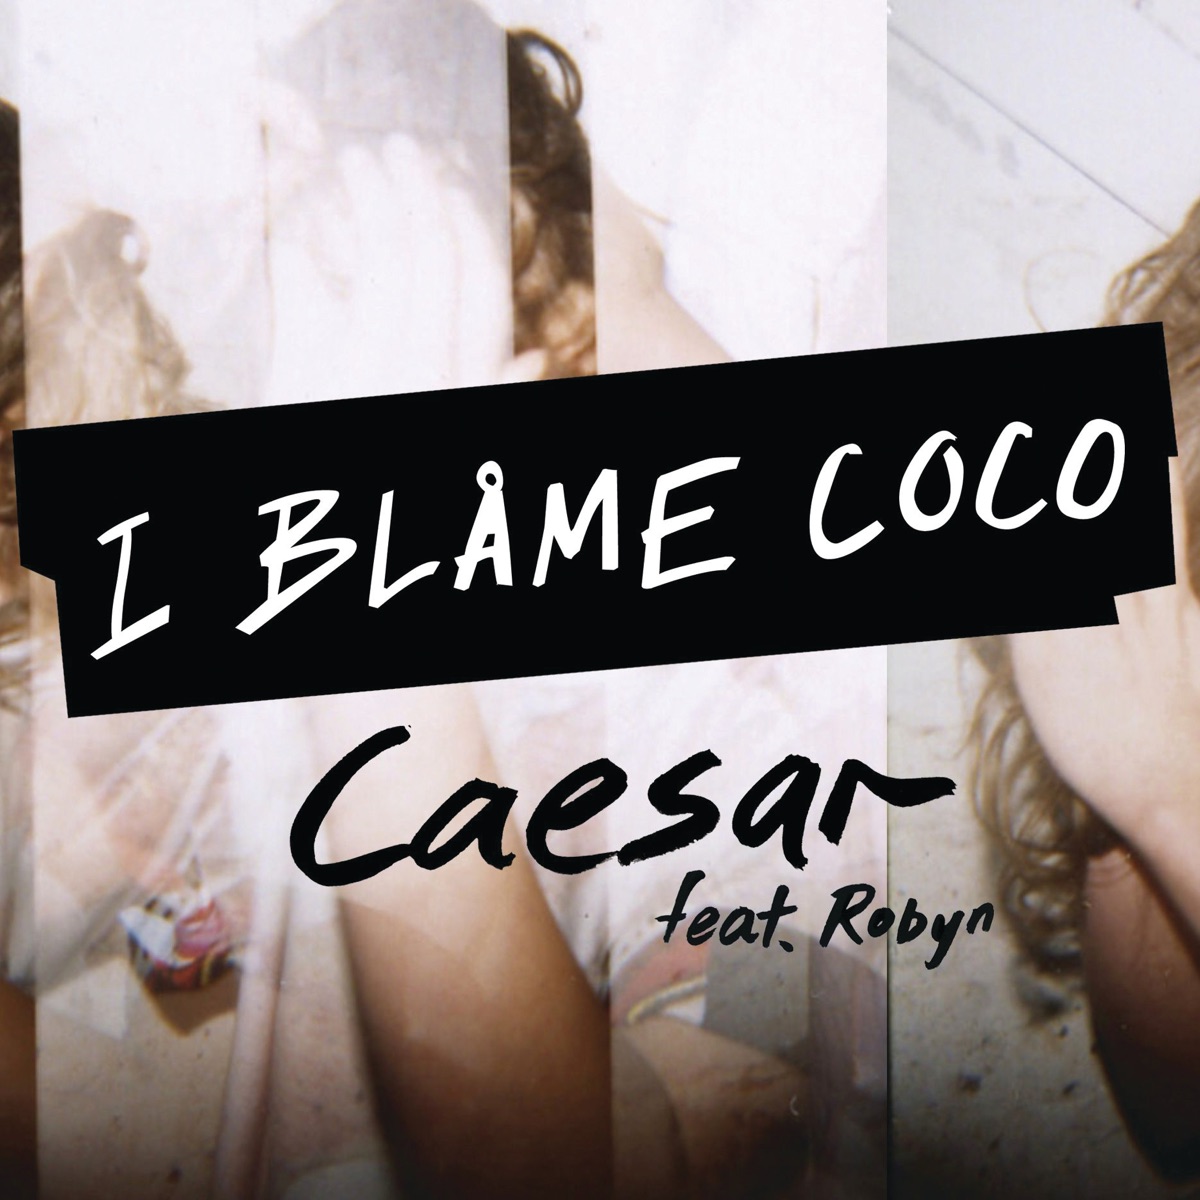 I Blame Coco ft. featuring Robyn Caesar cover artwork